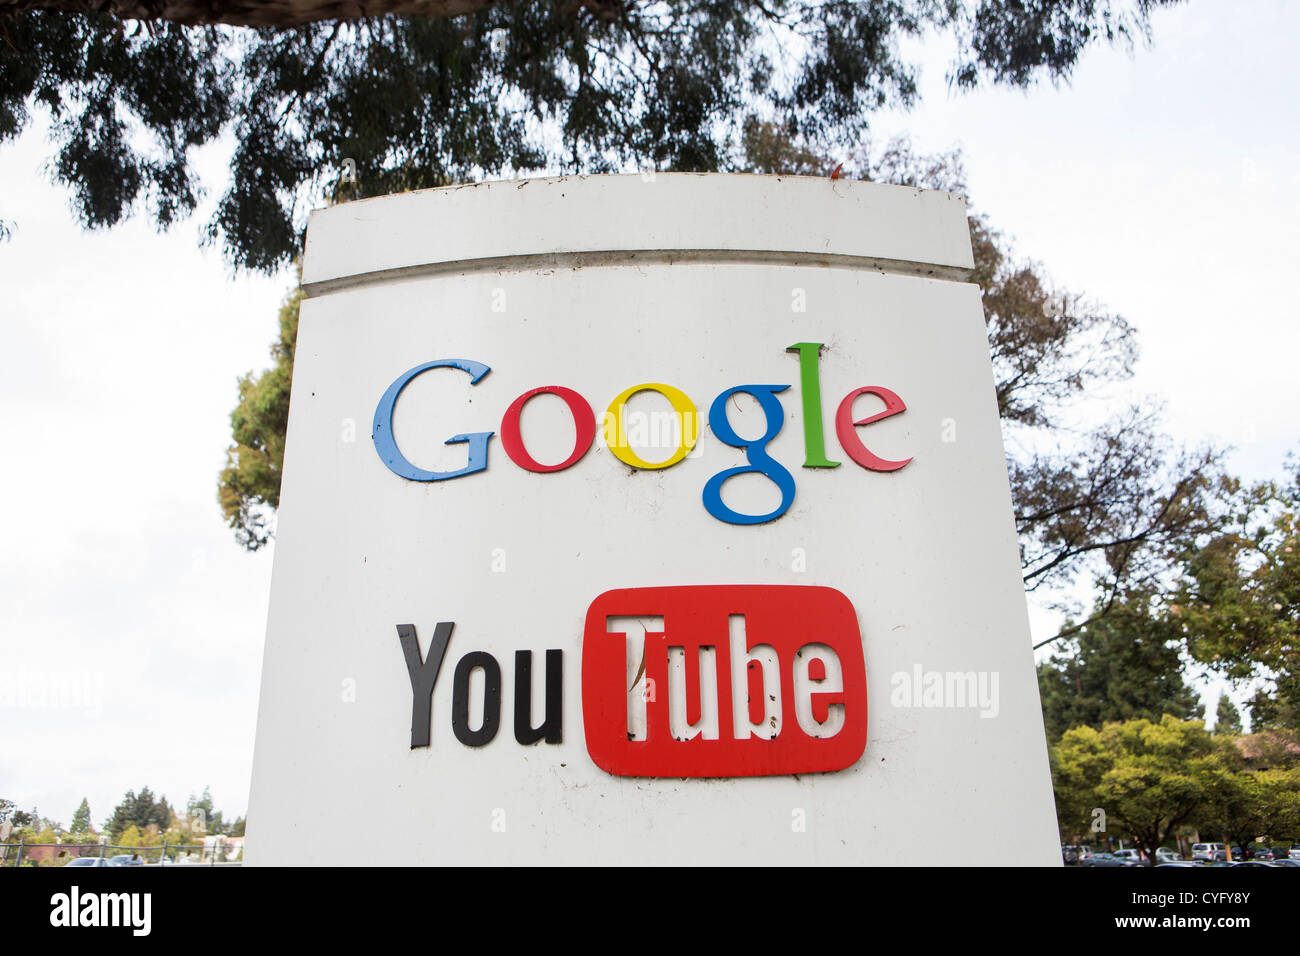 The YouTube section of the Google headquarters complex, also known as the 'Googleplex' Stock Photo